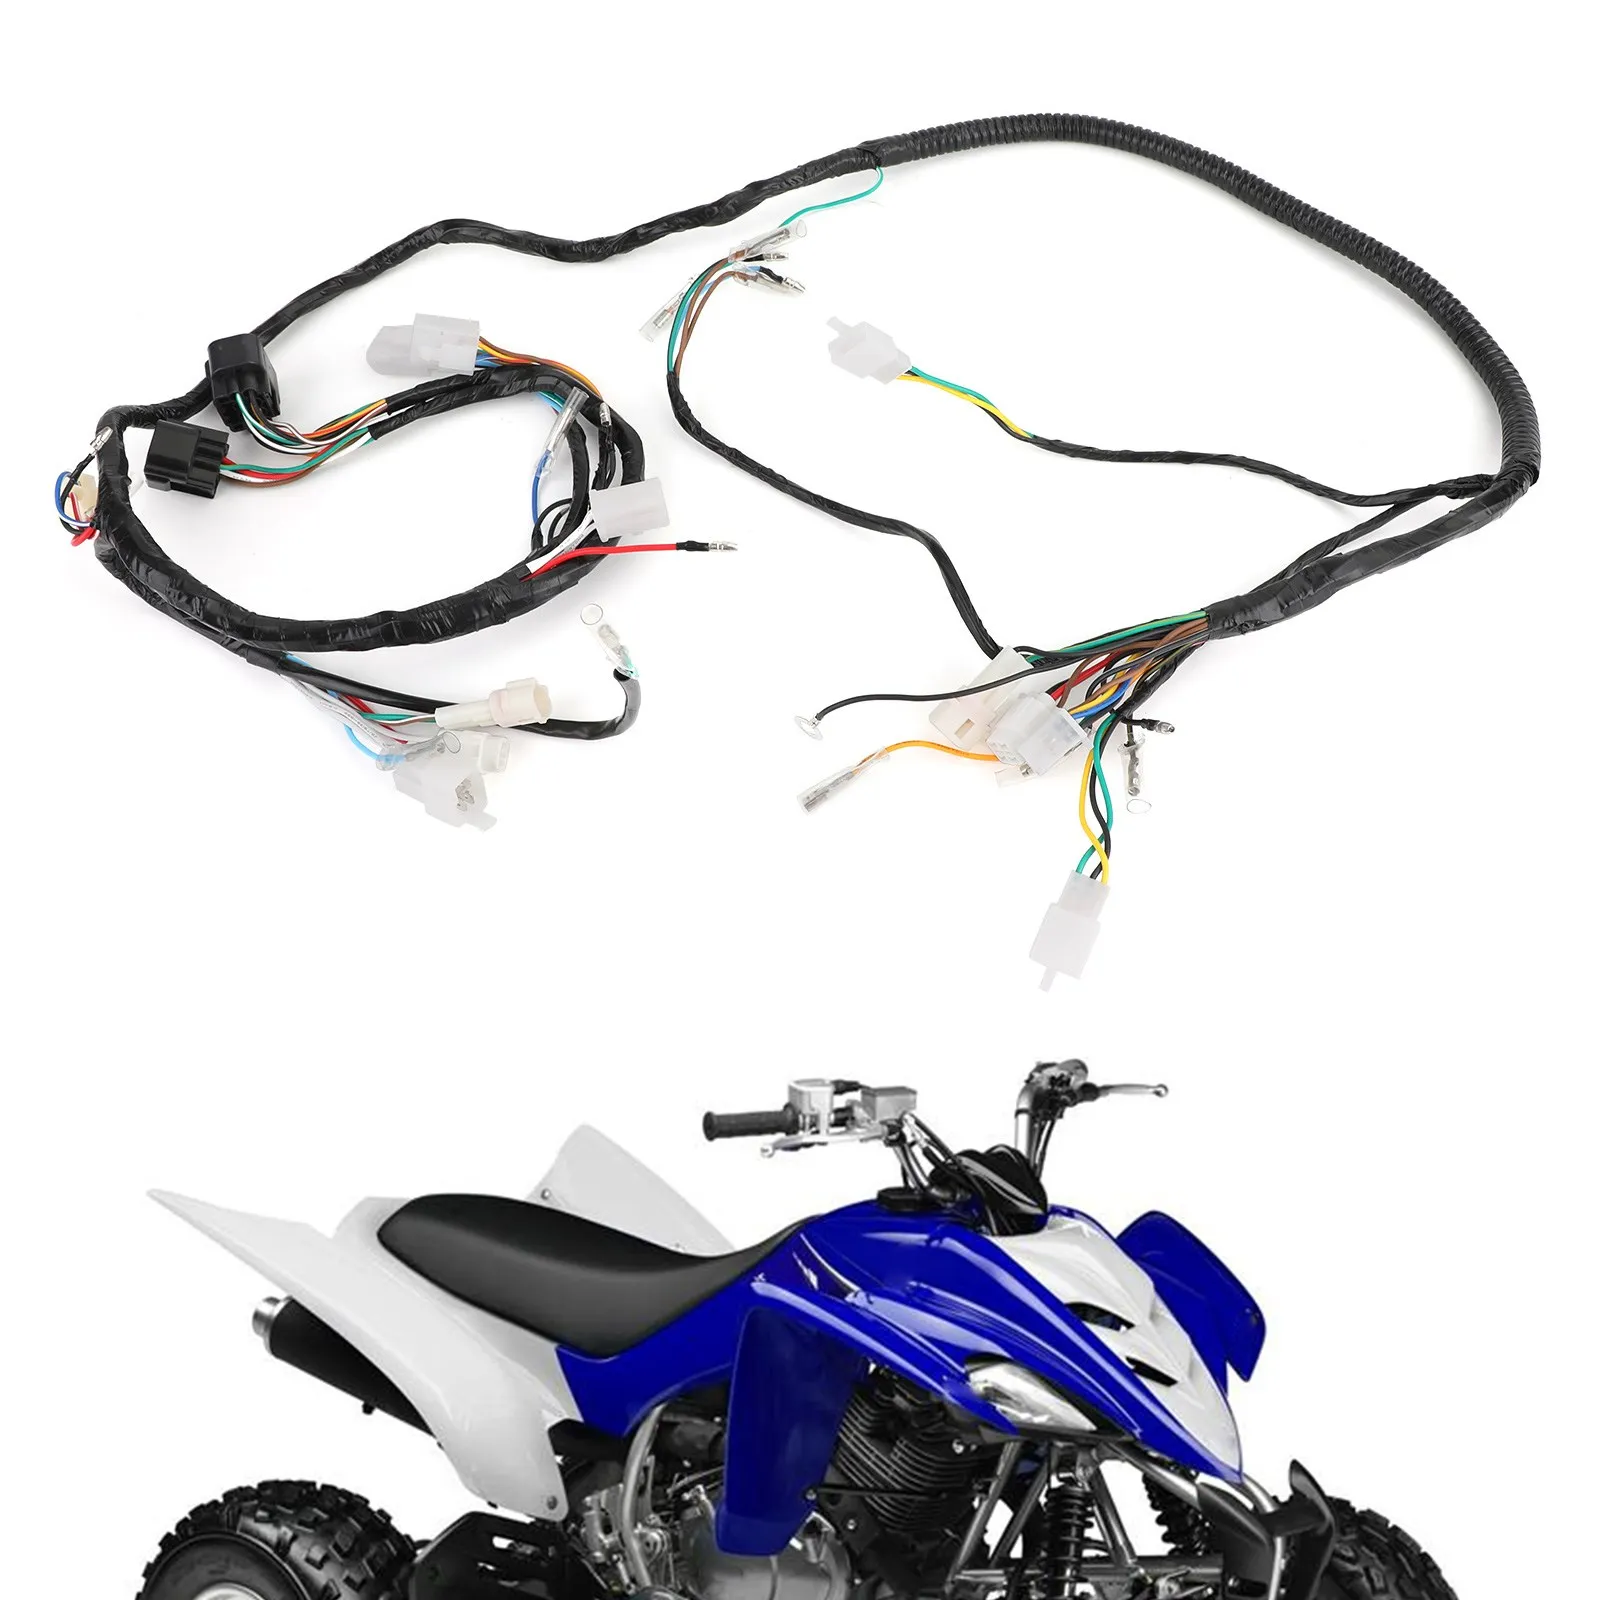 

Artudatech WIRE HARNESS for Yamaha Warrior 350 YFM350 1997 1998 1999 2000 2001 3GD-82590-40-00 Motorcycle Accessories Parts